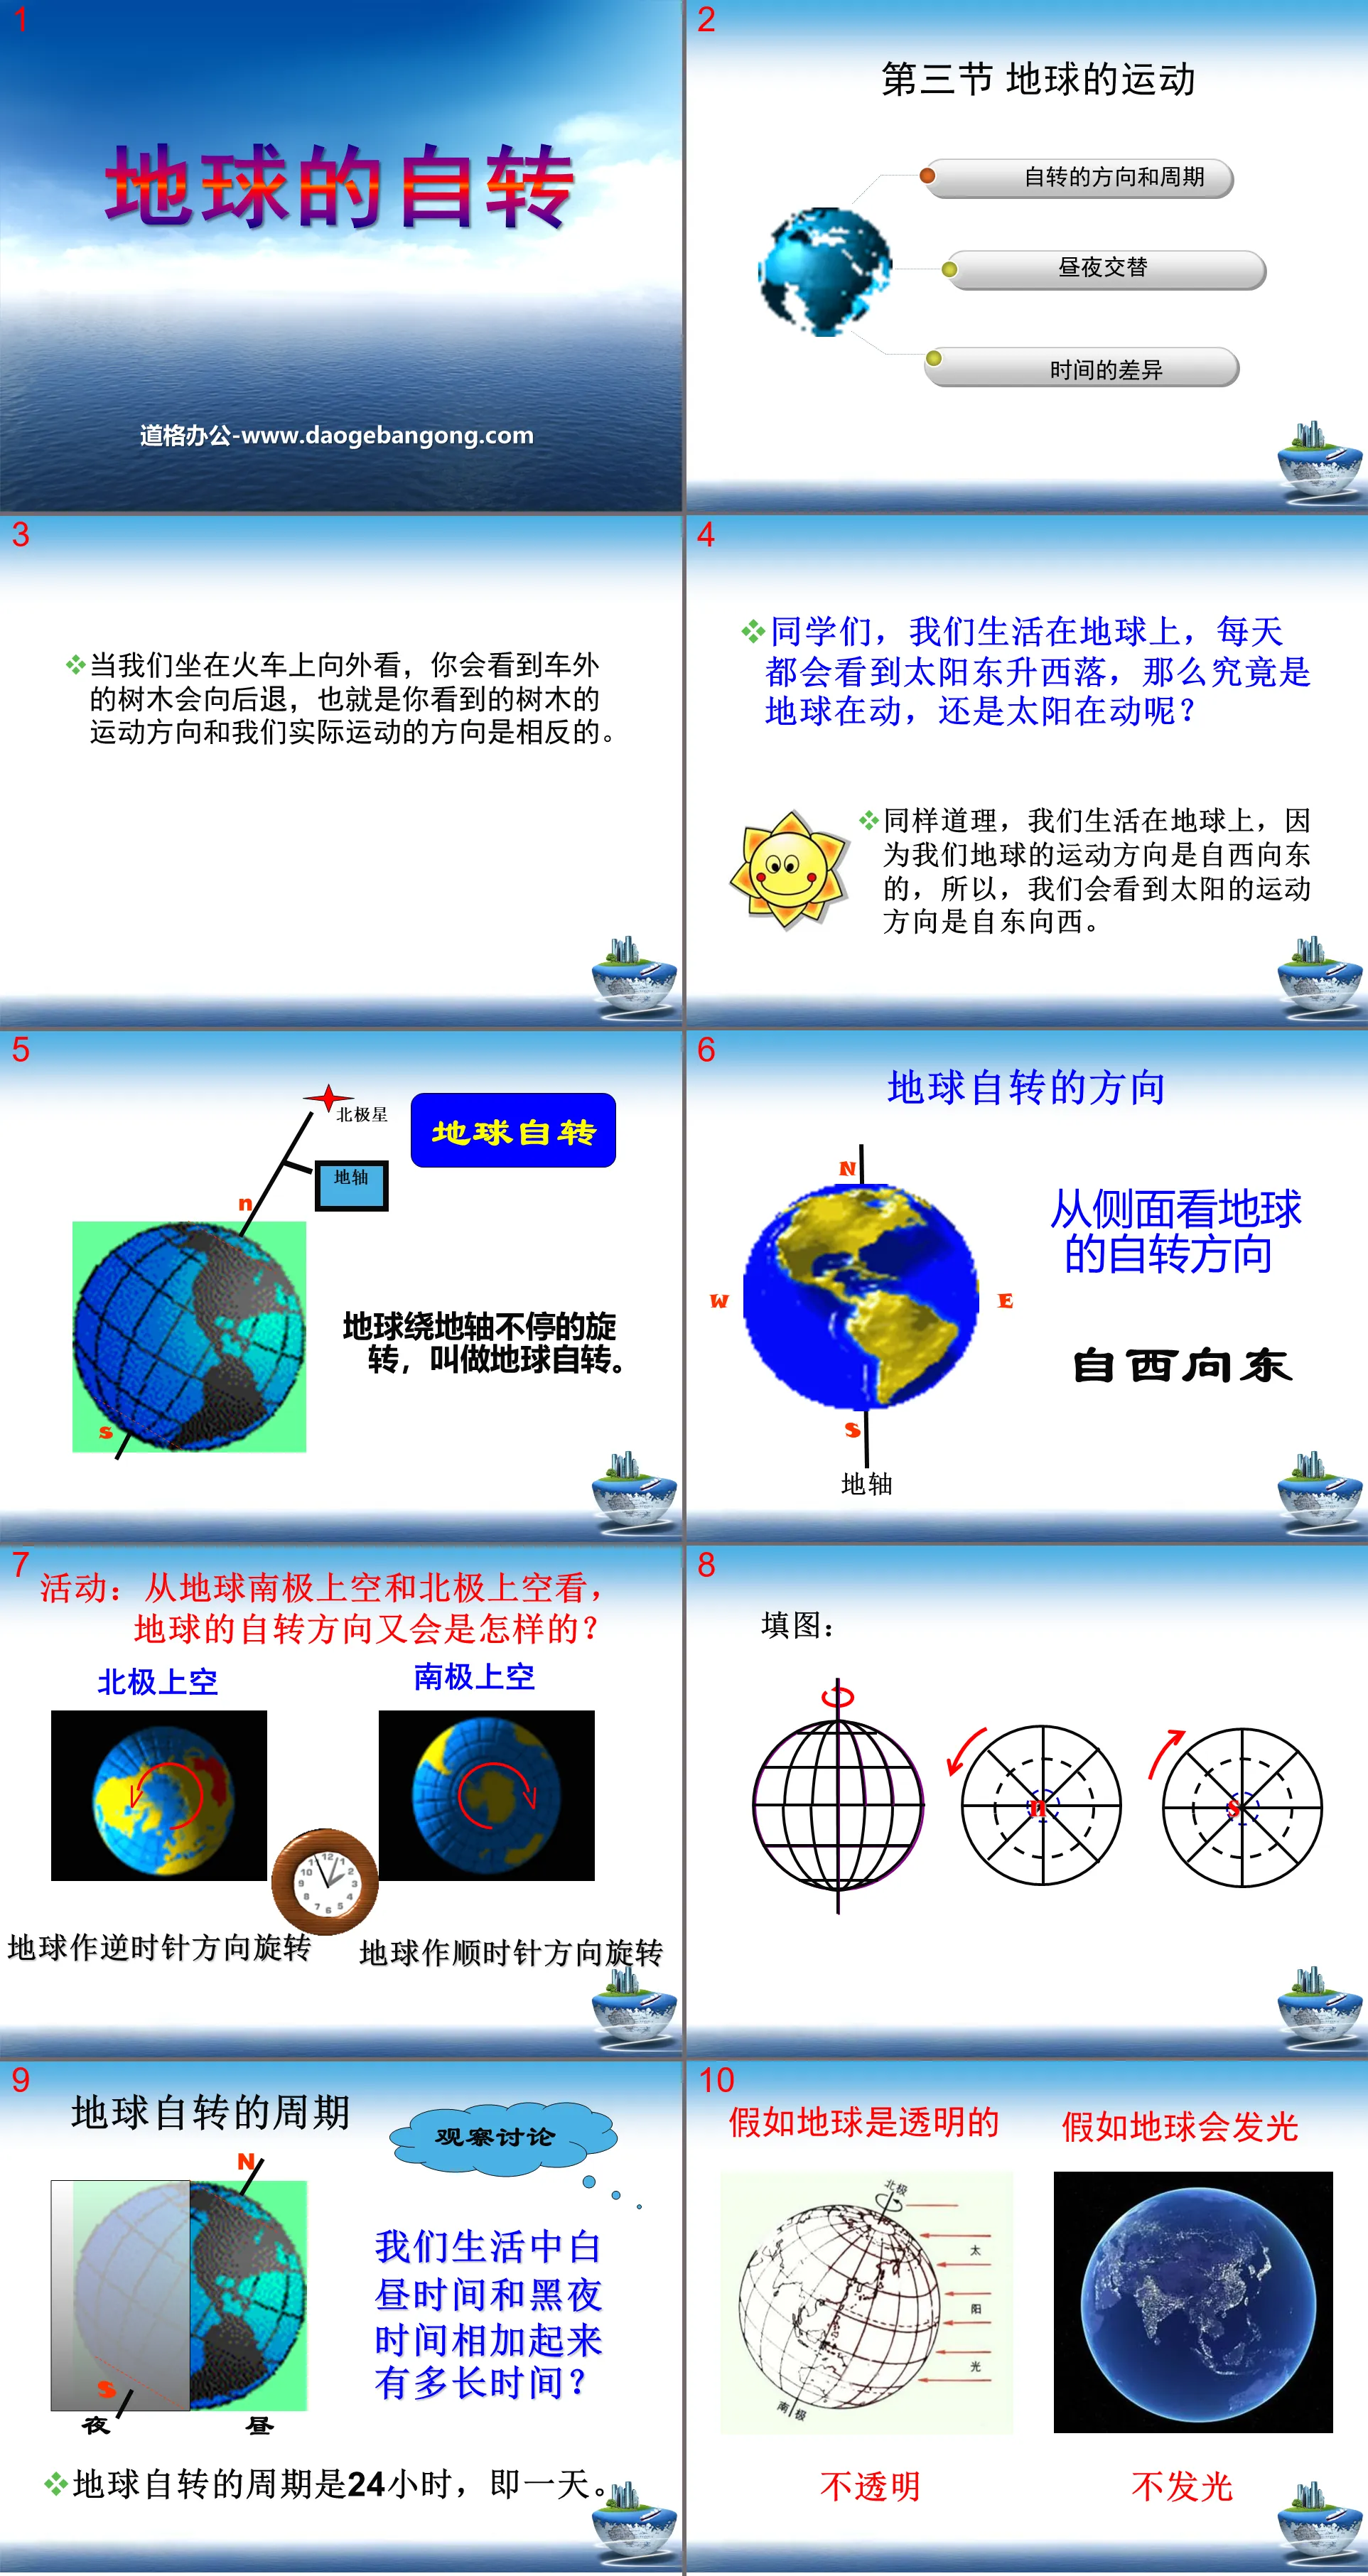 "The Rotation of the Earth" PPT download